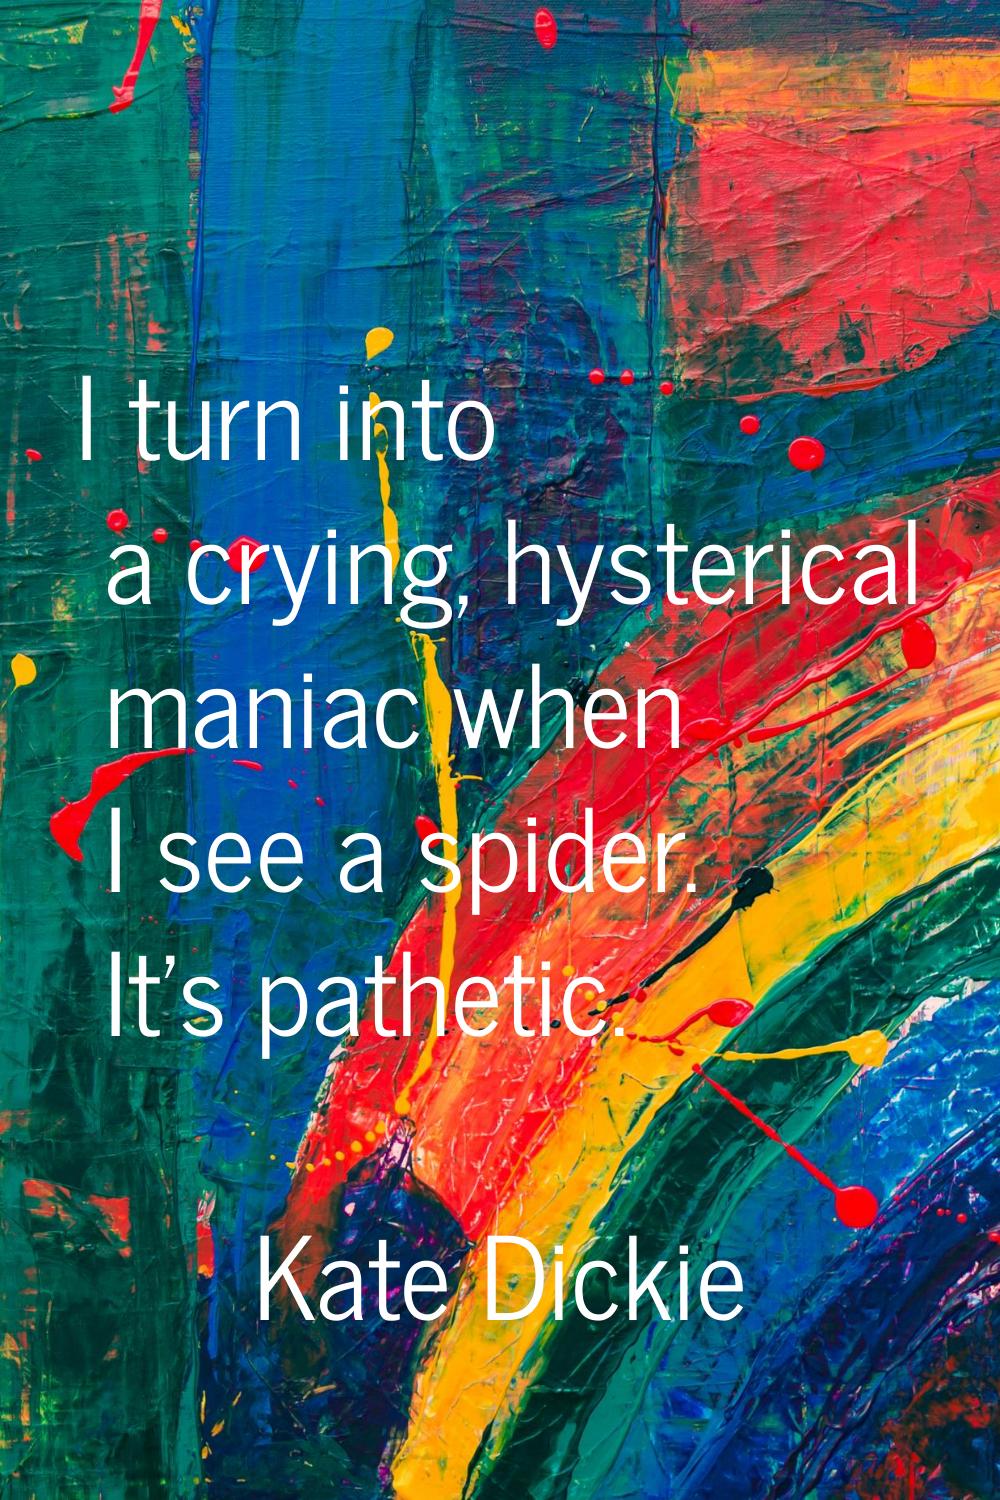 I turn into a crying, hysterical maniac when I see a spider. It's pathetic.